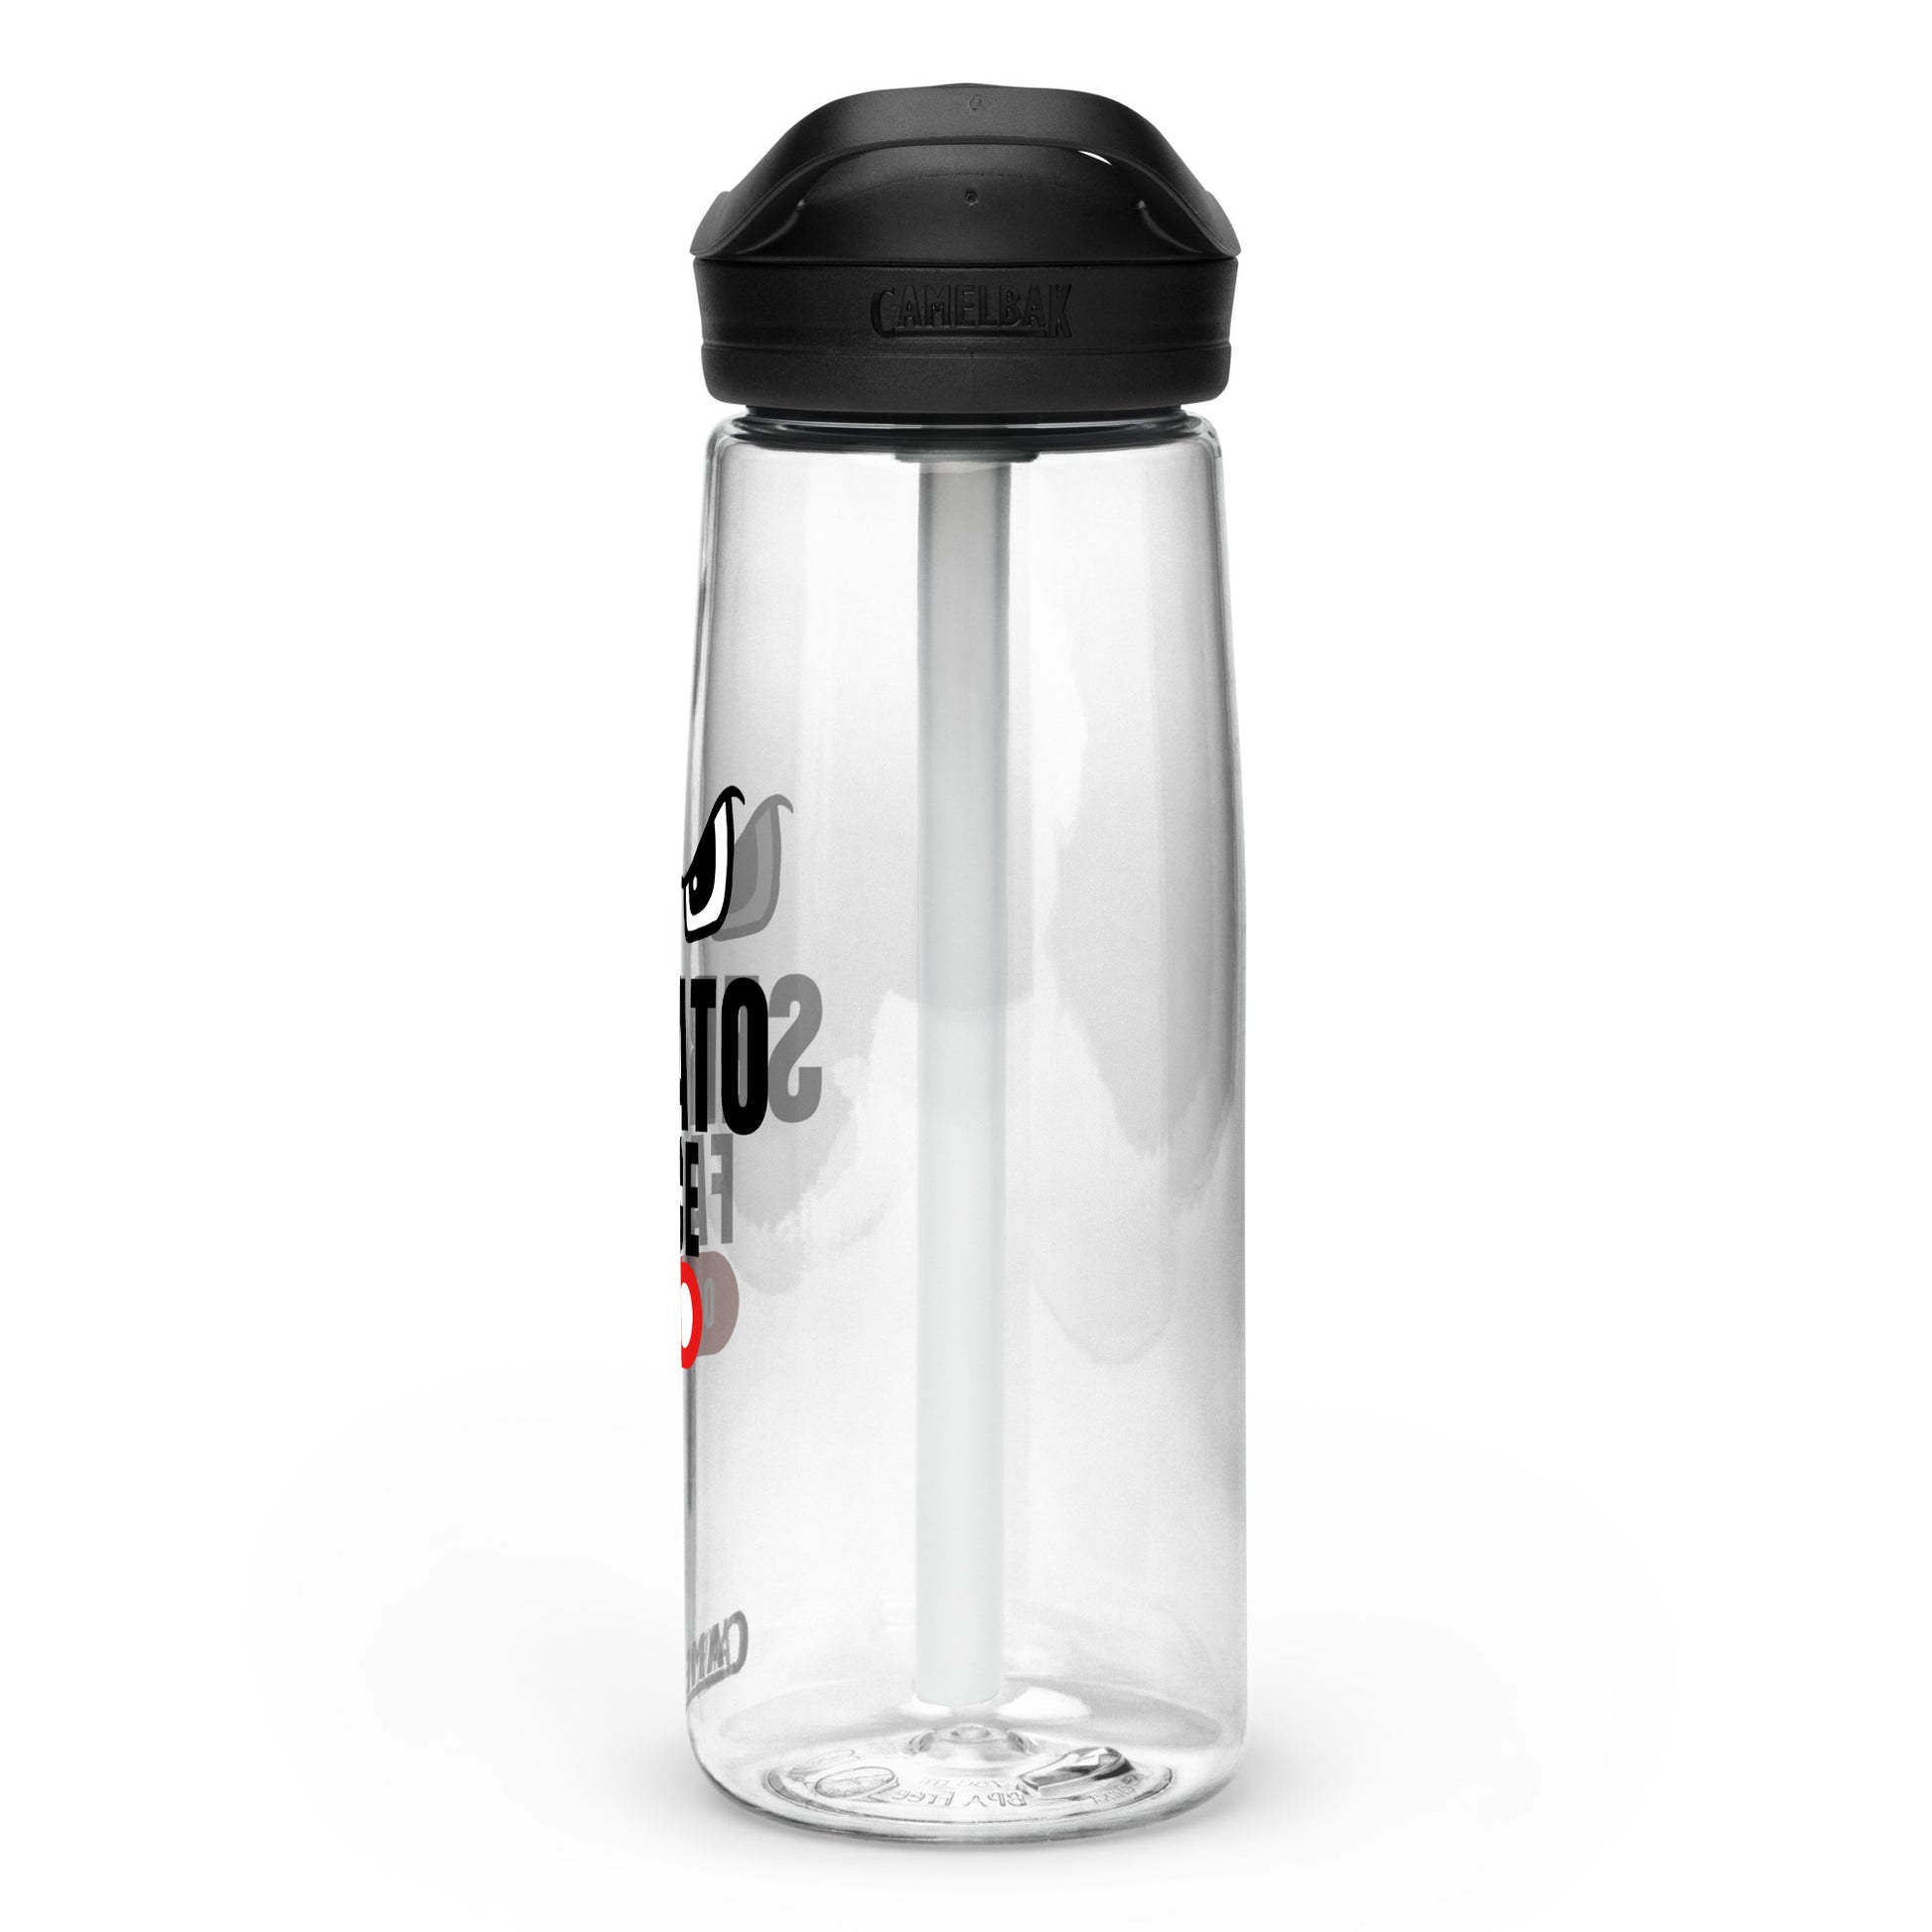 No Serato Face Sports water bottle - Another Bodega